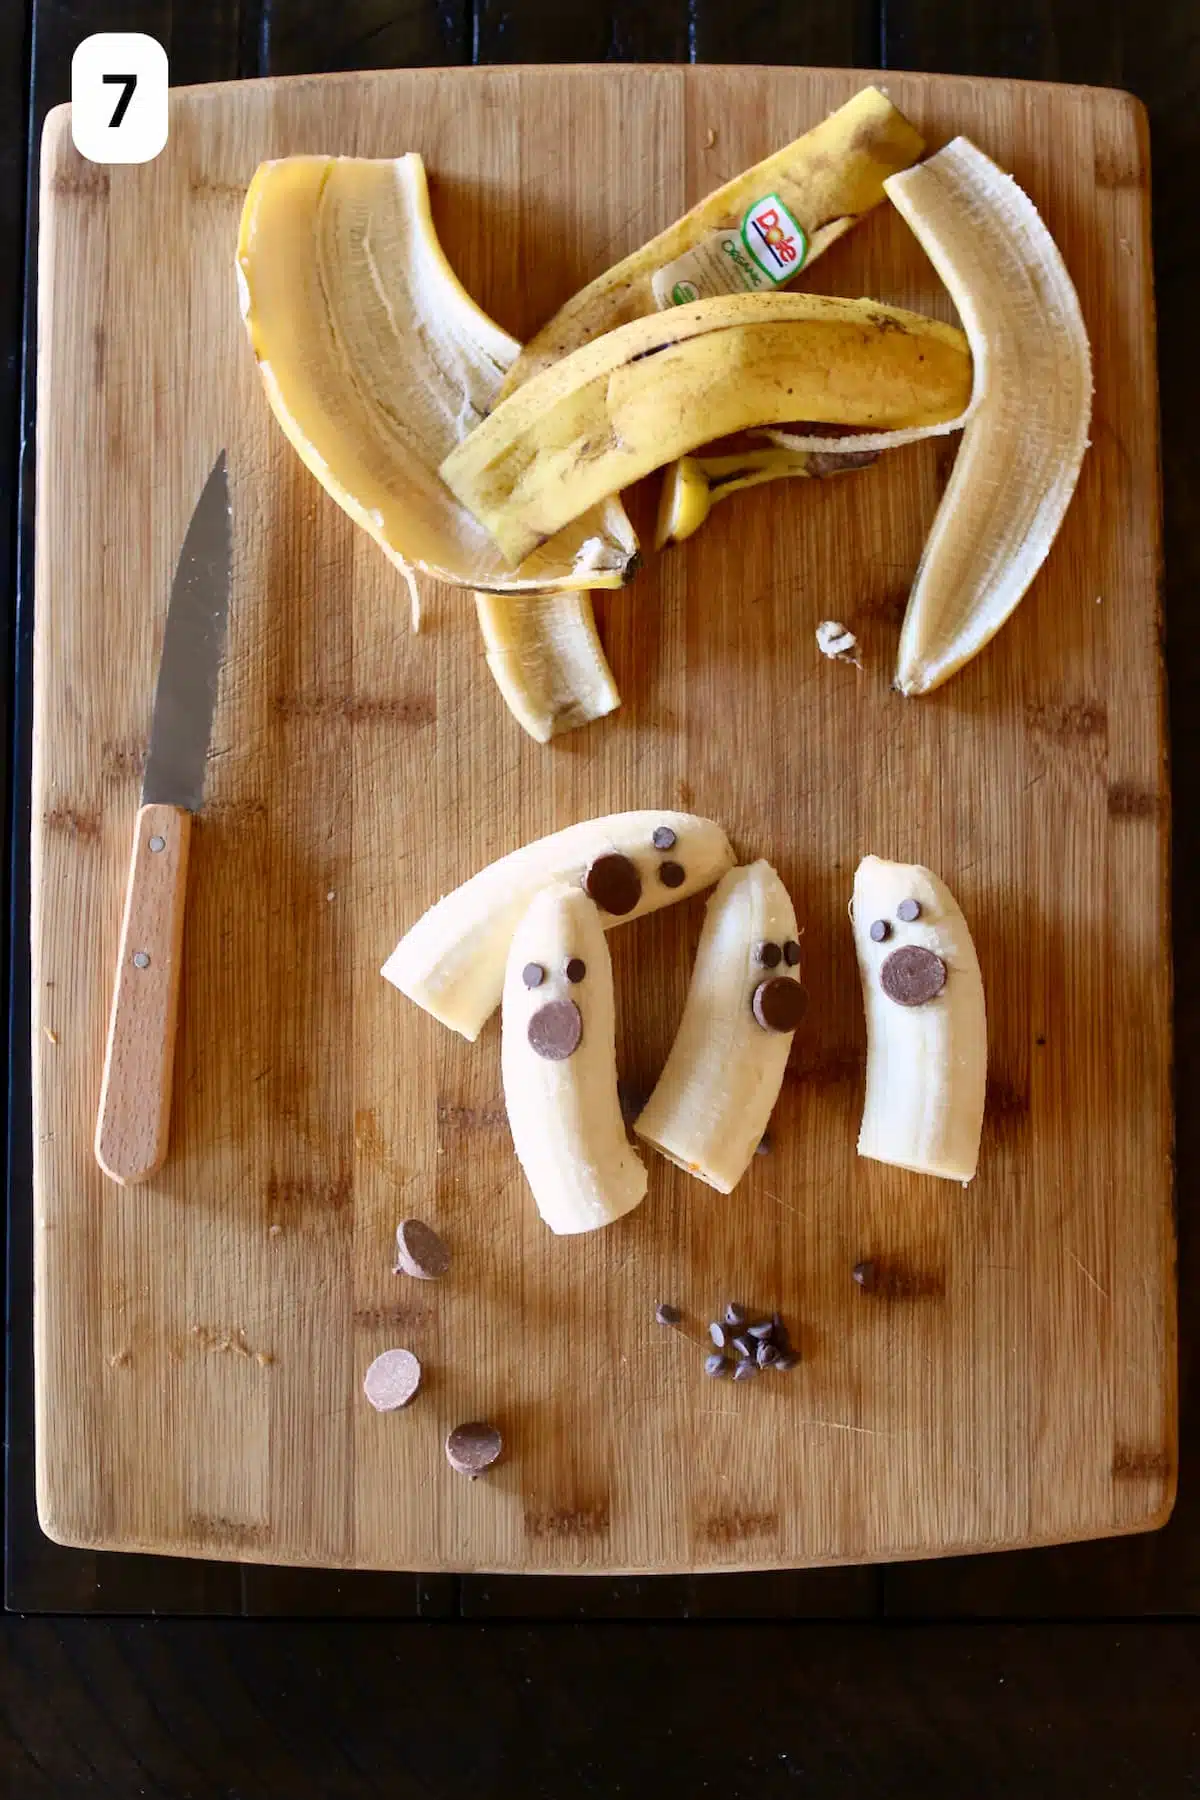 a cutting board with peeled bananas with decorations to look like ghosts.